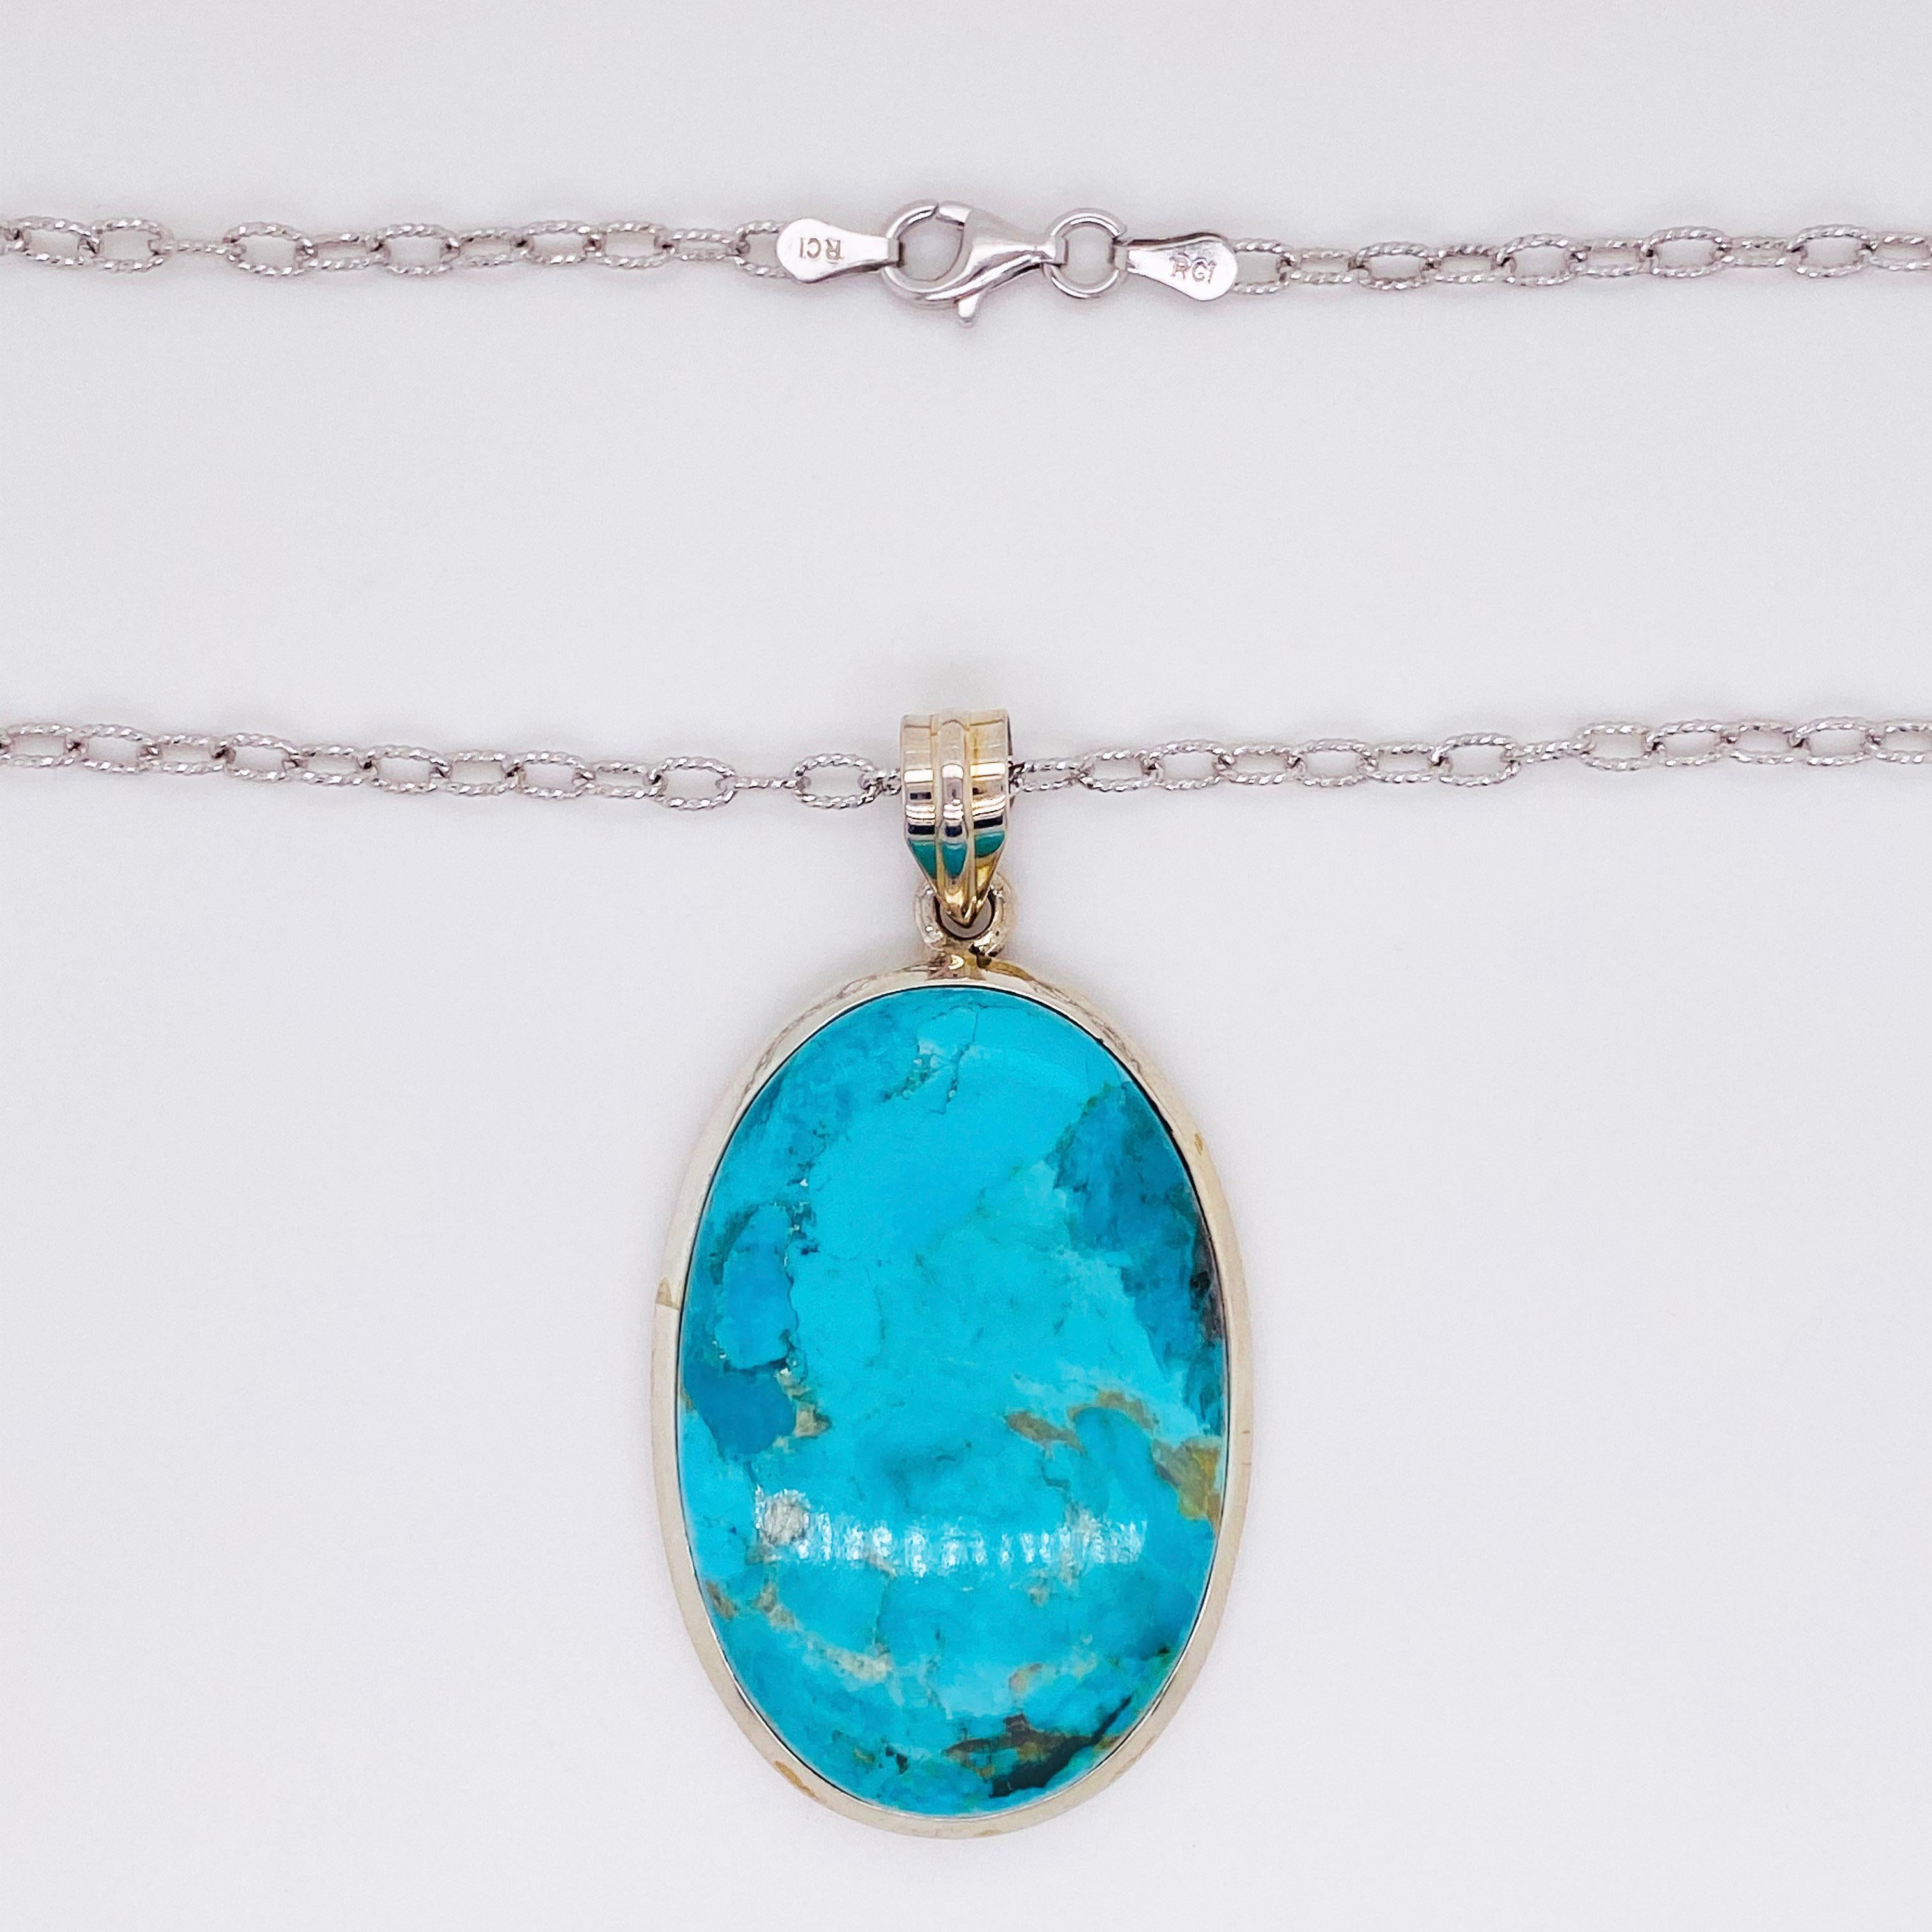 Kingman Turquoise is known for being one of the highest quality turquoise available. The Kingman Turquoise Mine is one of the oldest Turquoise Mines in America. It was originally discovered by prehistoric Indians well over 1000 years ago. Kingman